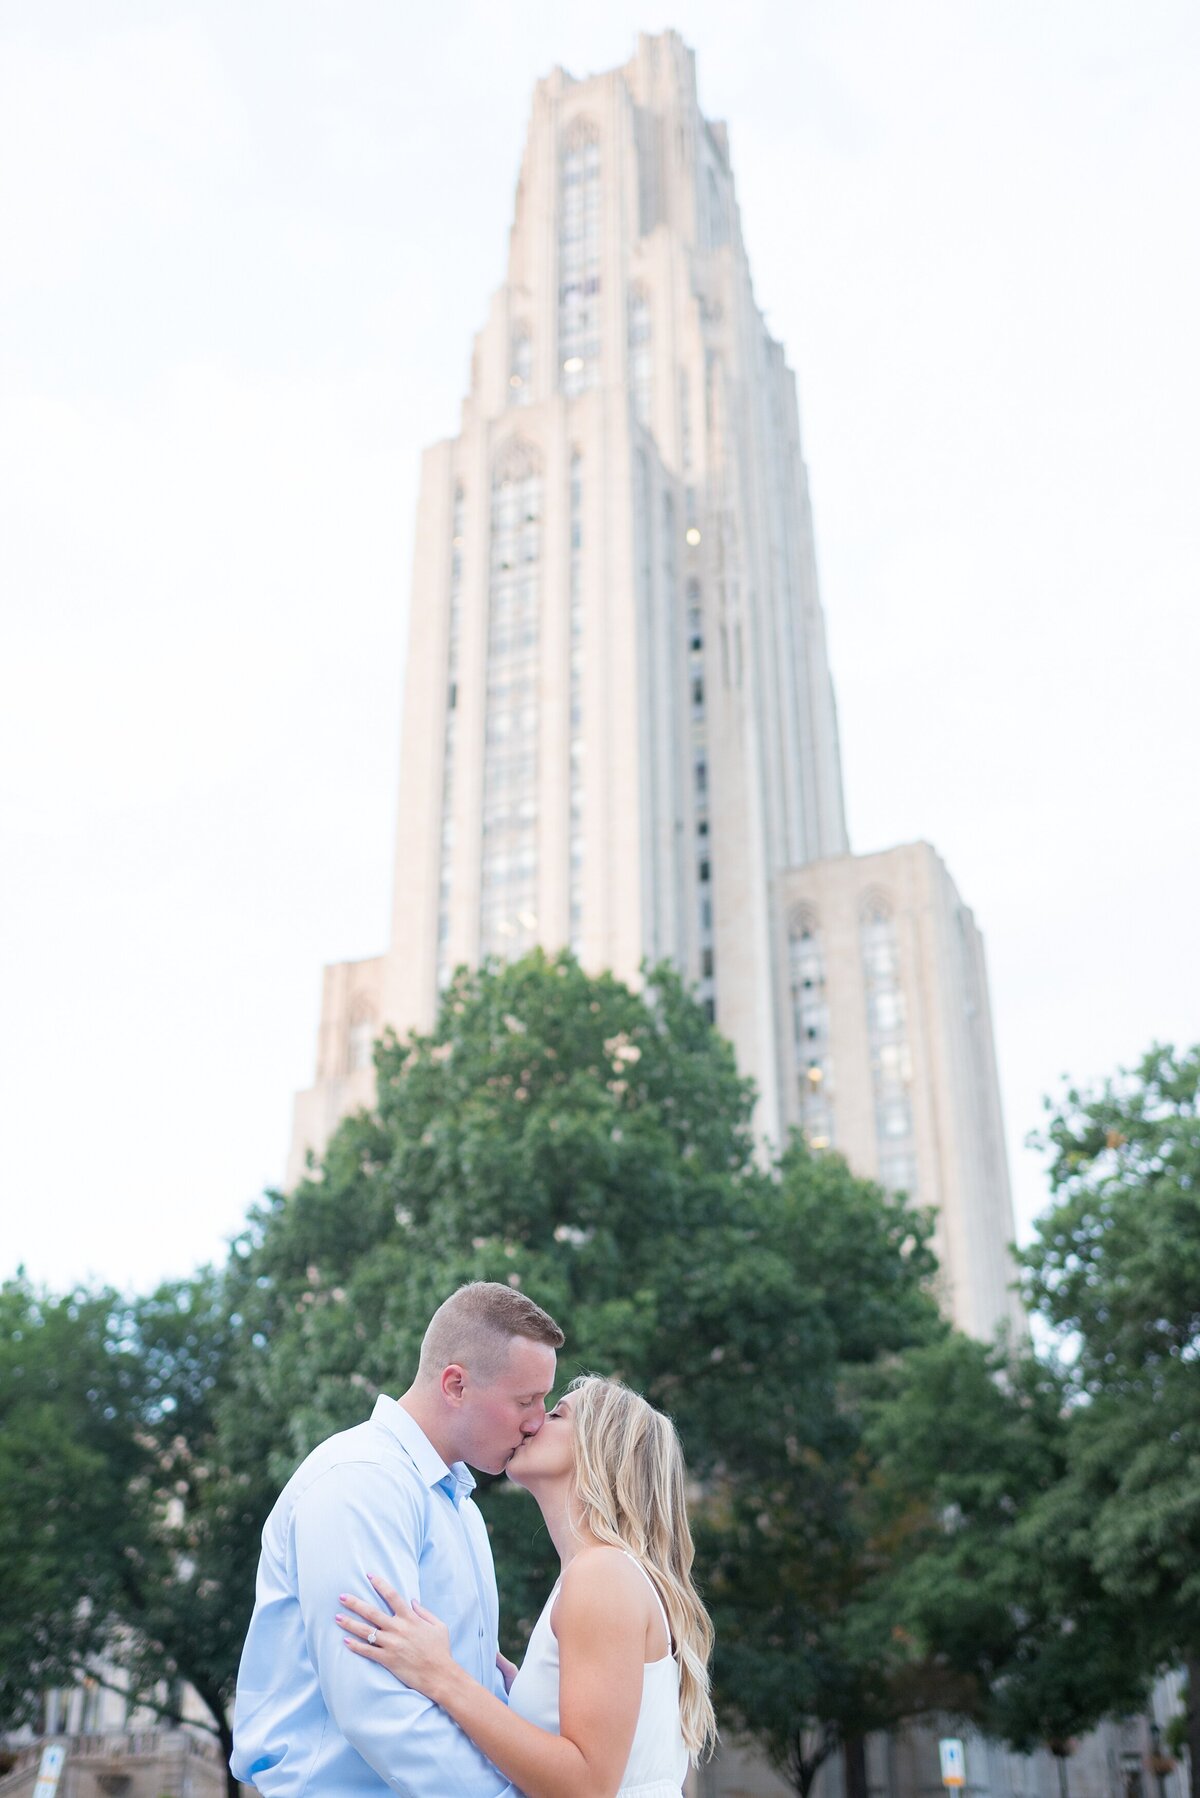 11_pitt-alumni-engatement-pictures-with-cathedral-of-learning_1119